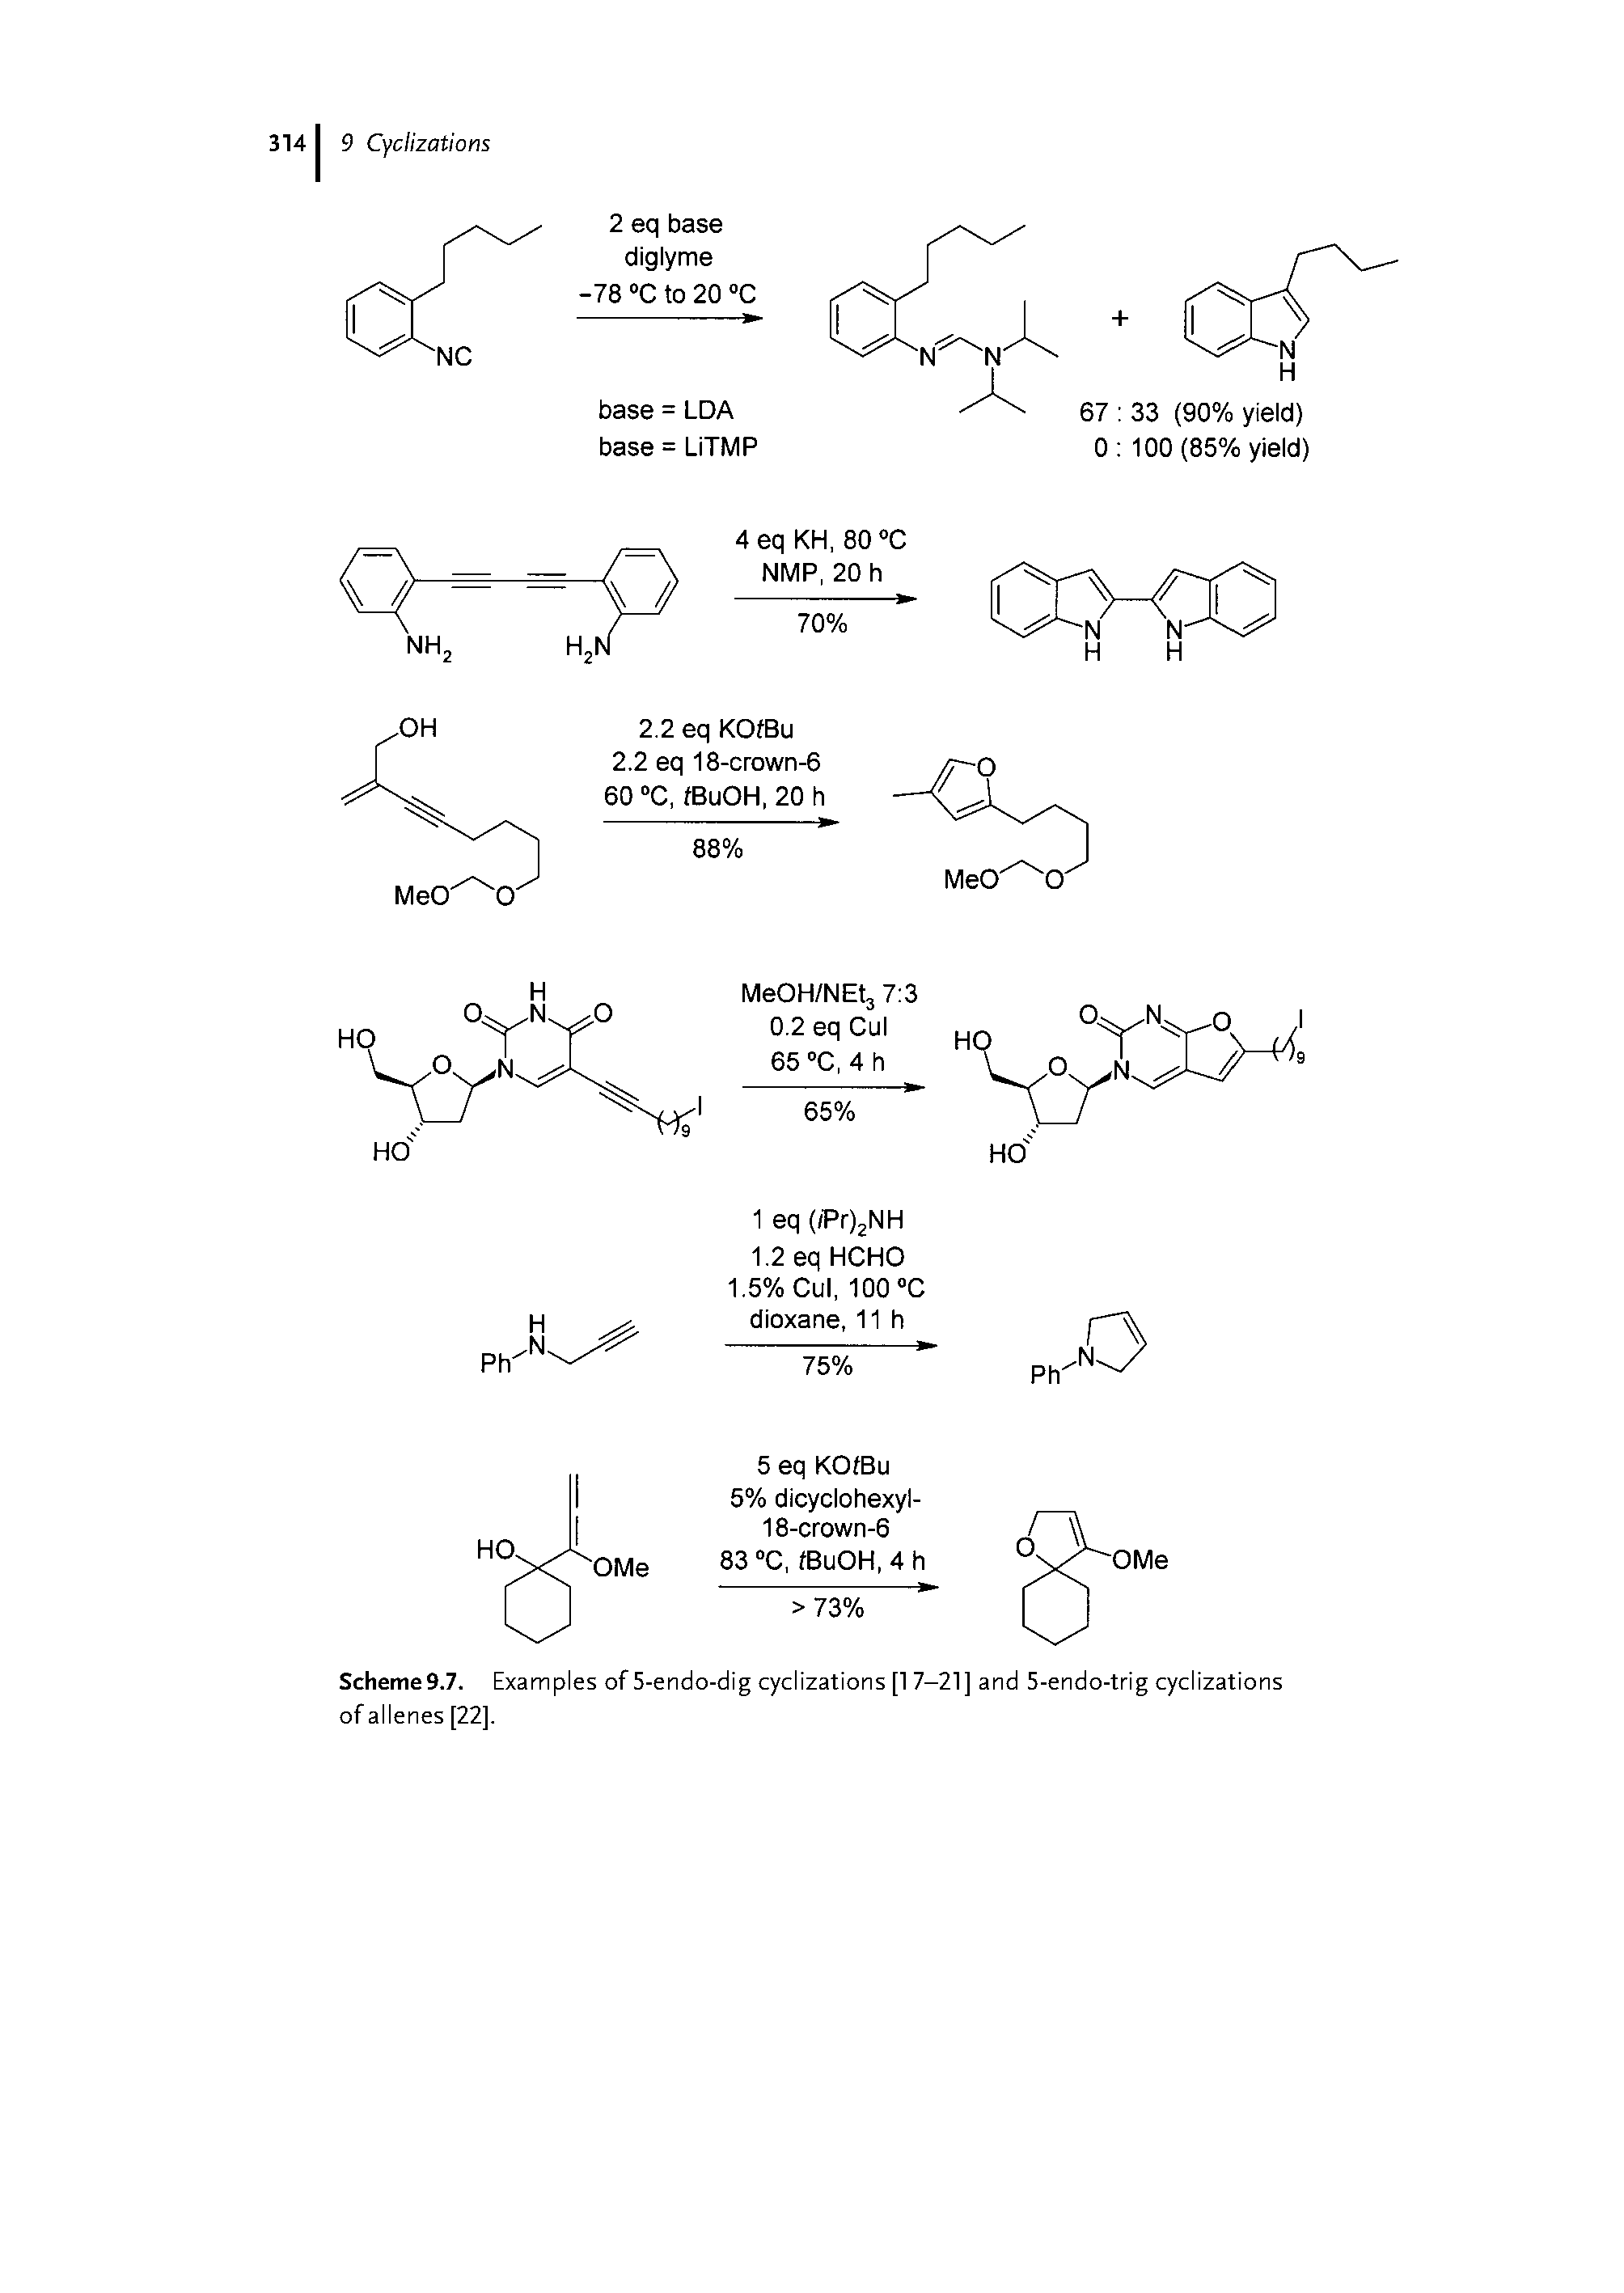 Scheme9.7. Examples of 5-endo-dig cyclizations [1 7-21] and 5-endo-trig cyclizations of allenes [22],...